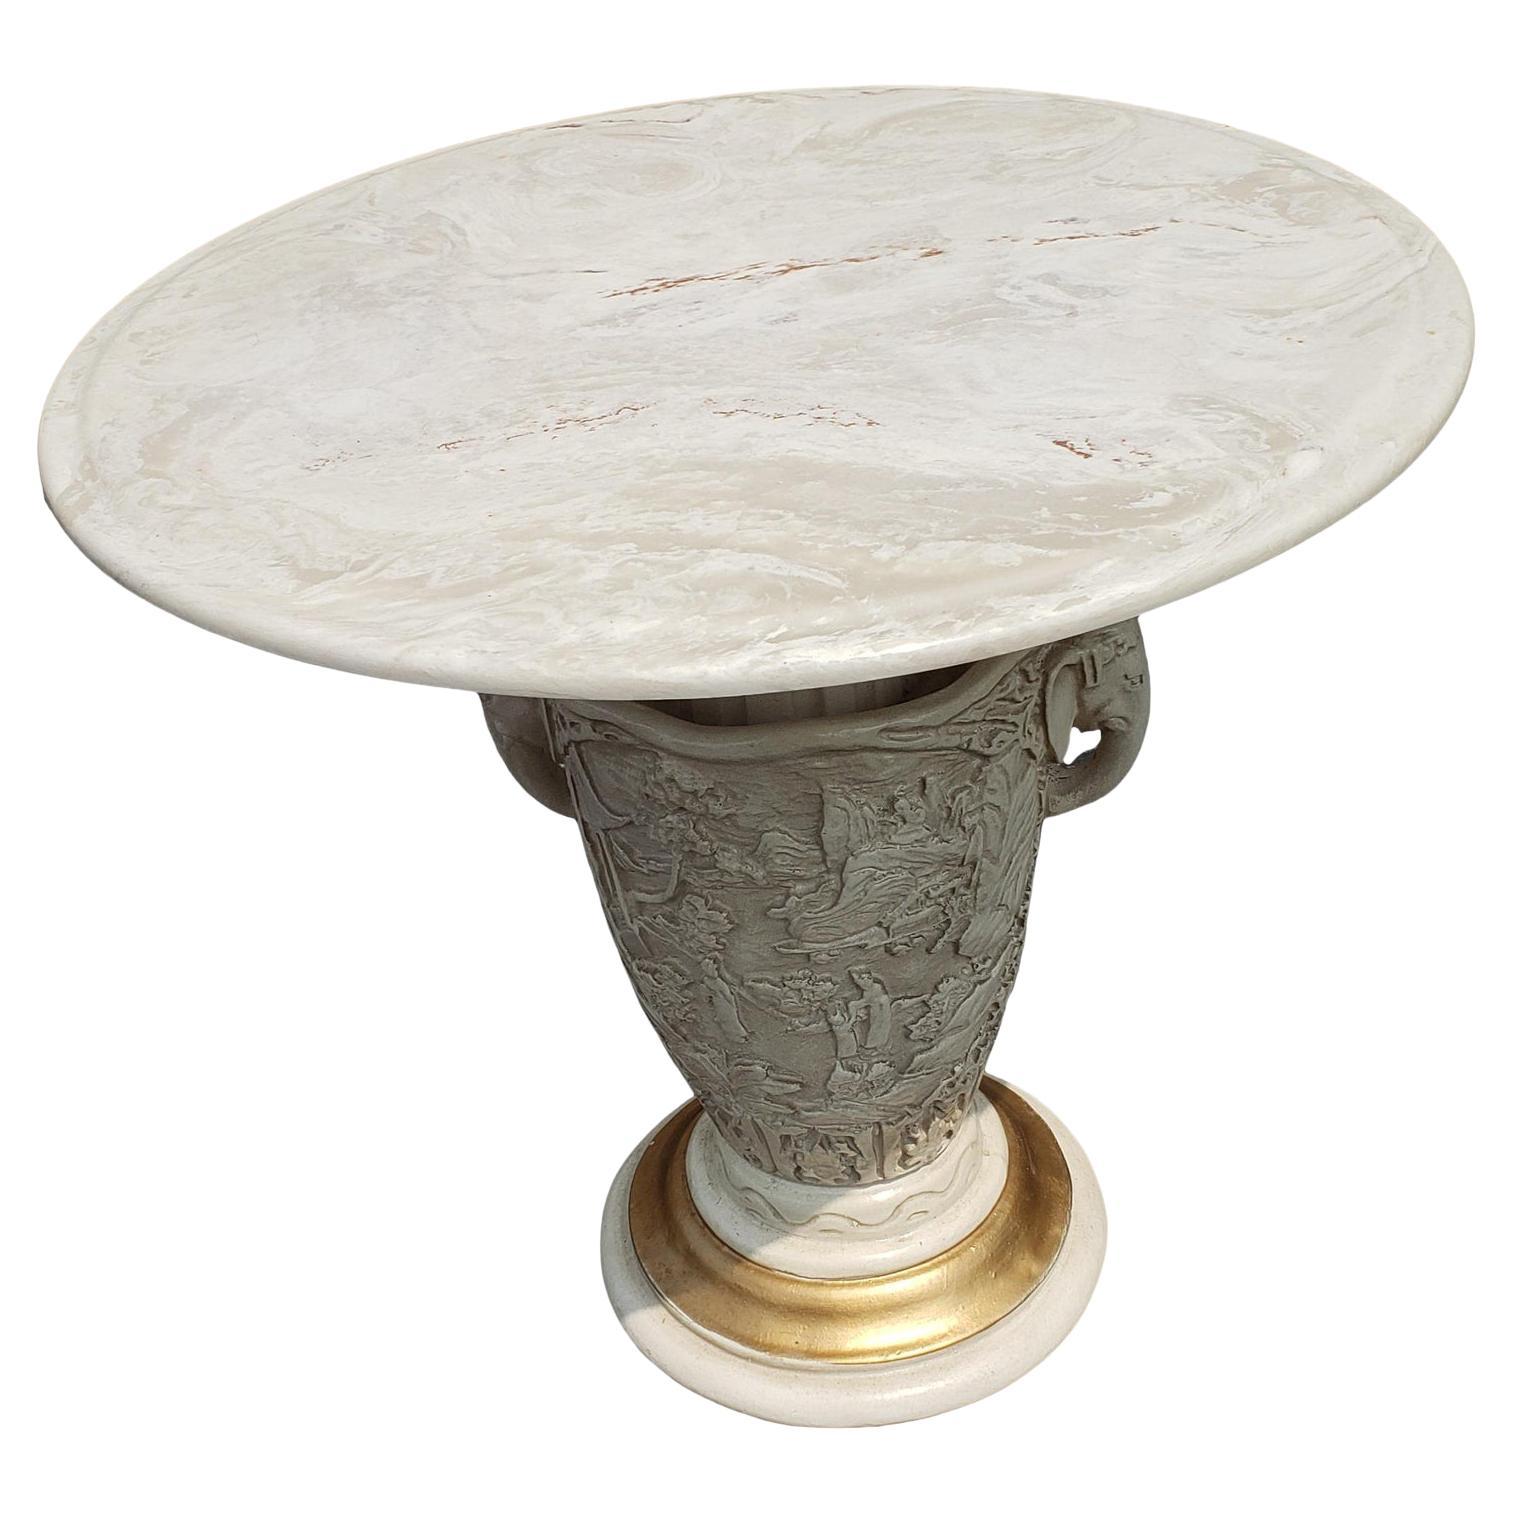 1960s Italian White Onyx Stone Top Pedestal Accent Table For Sale